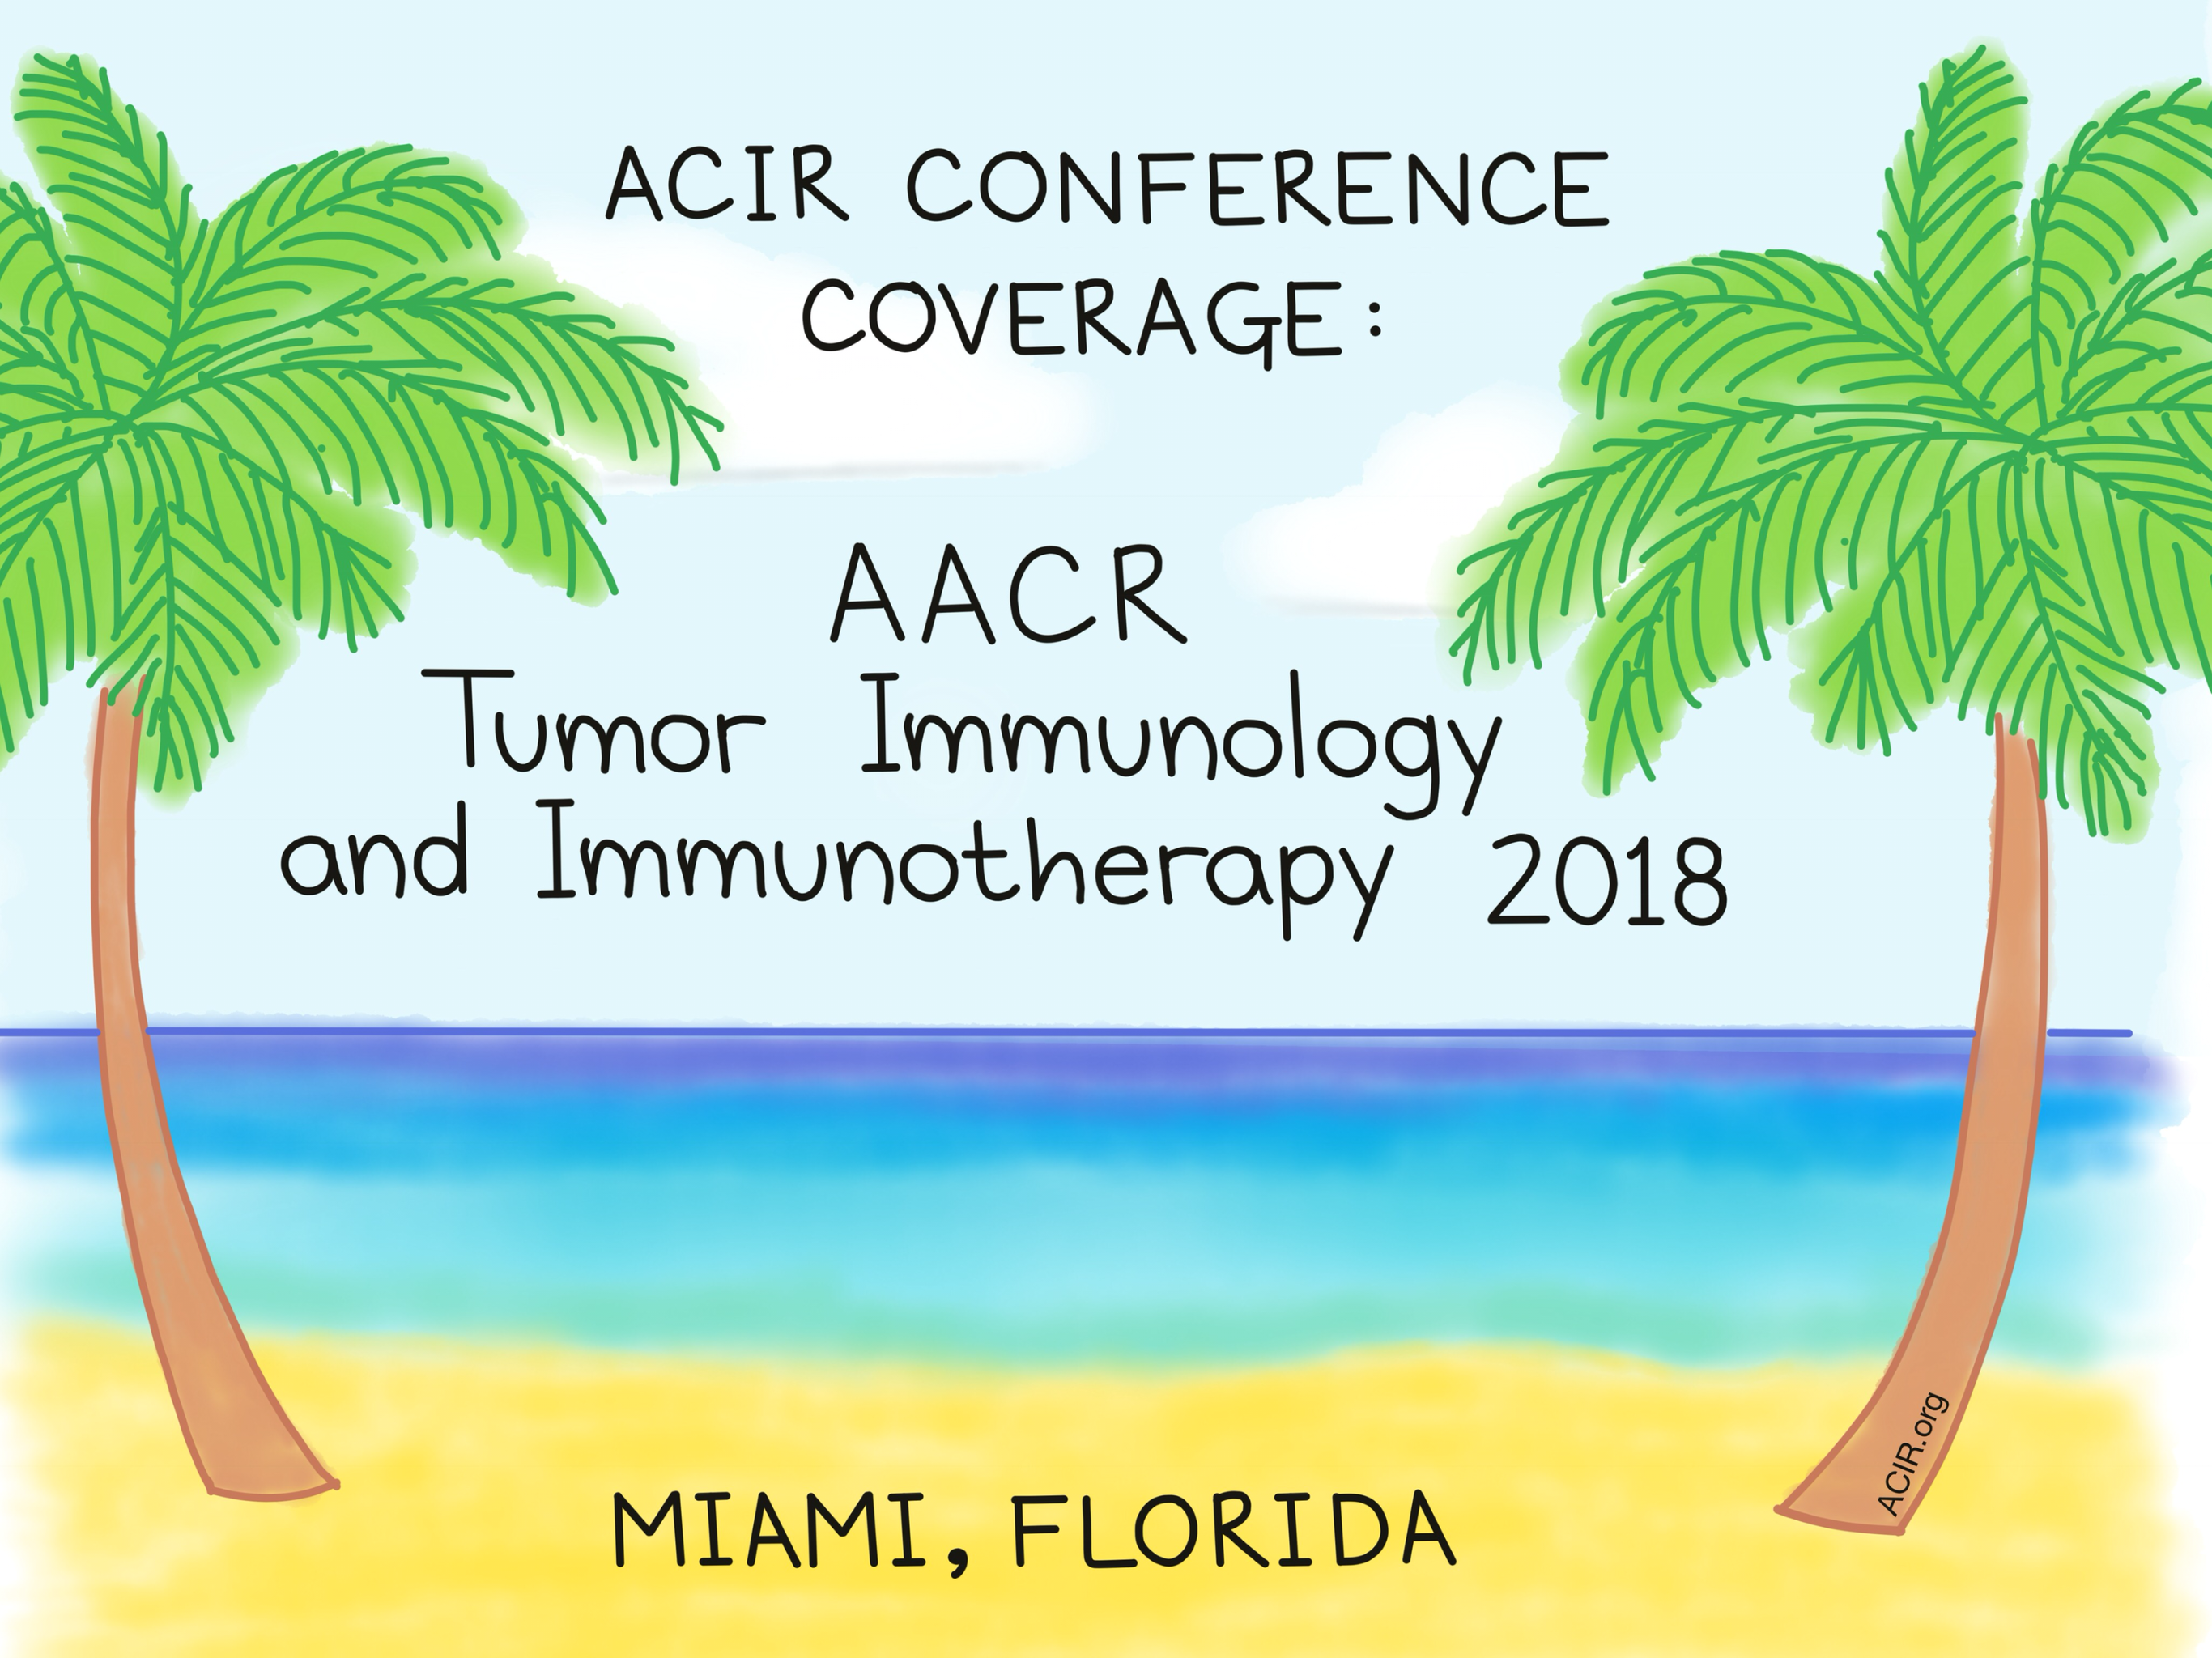 Conference coverage AACR Tumor Immunology and Immunotherapy 2018